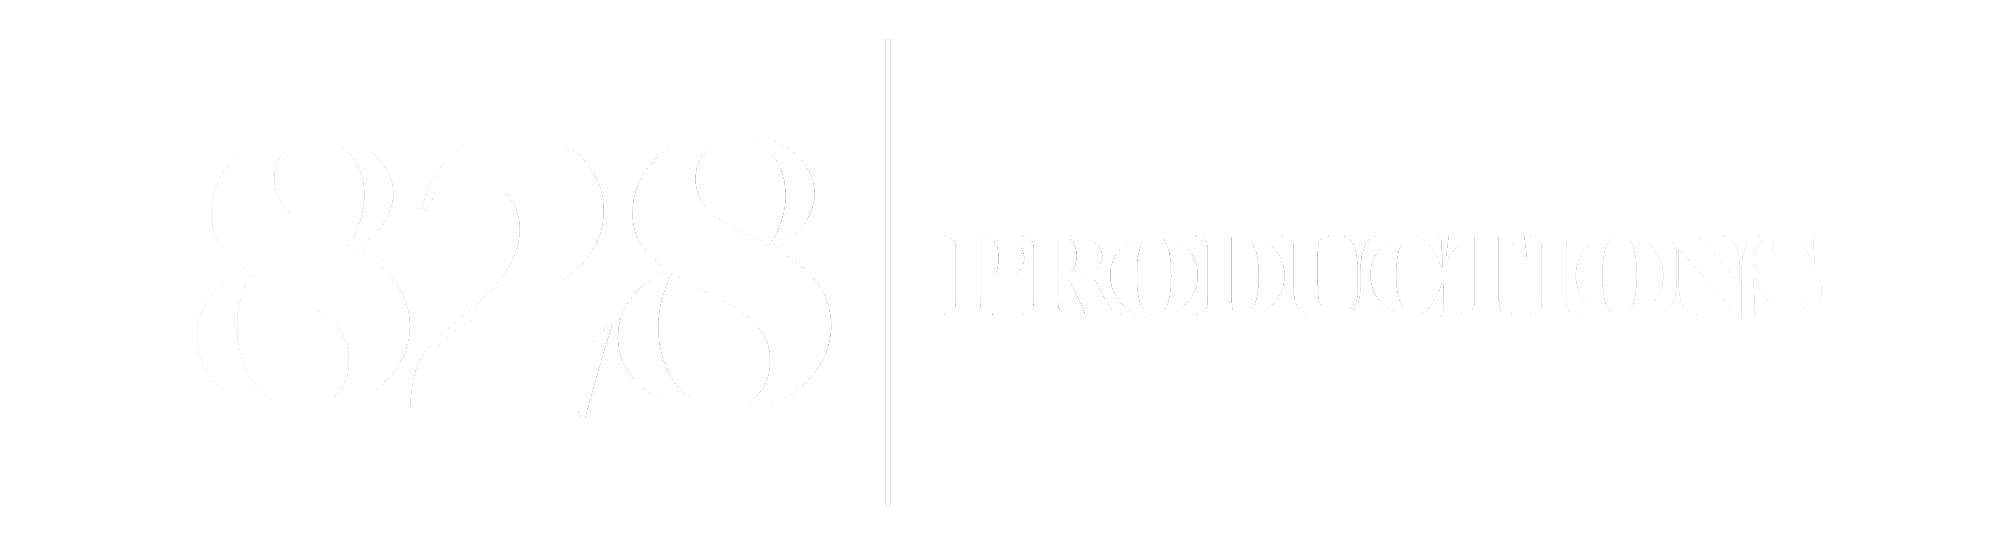 828 Productions